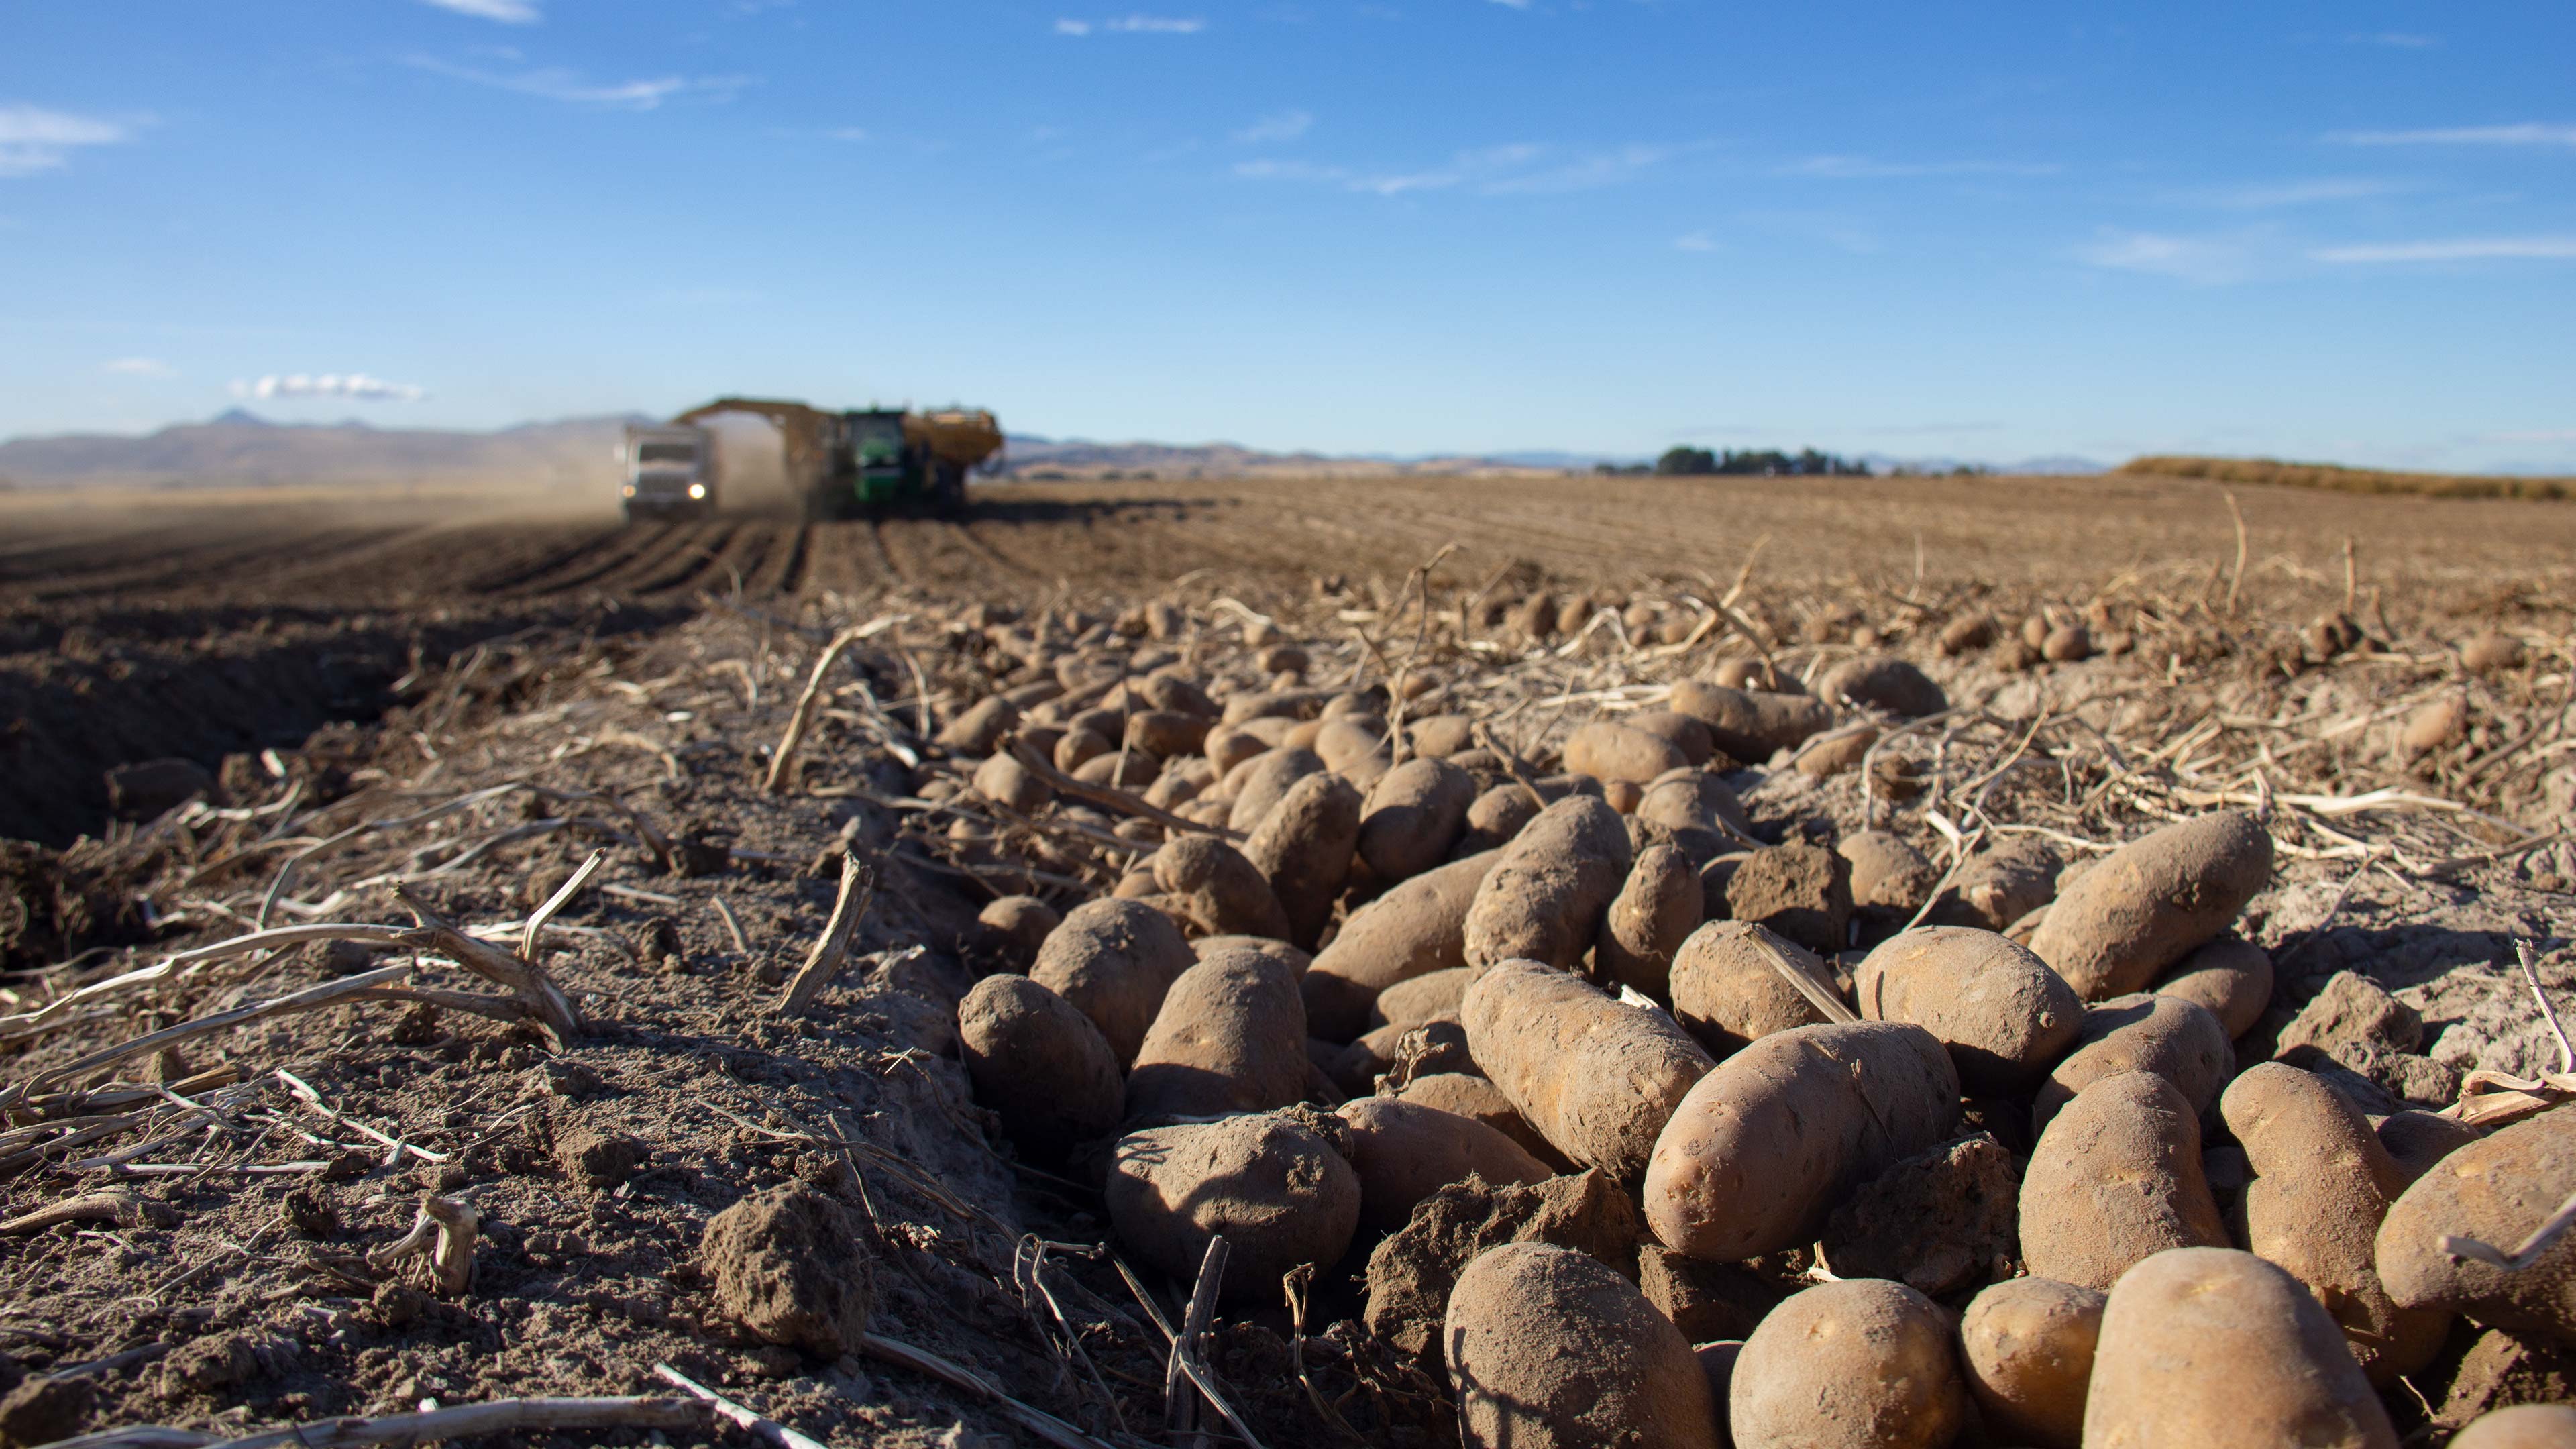 Windrowed potatoes waiting to be harvested